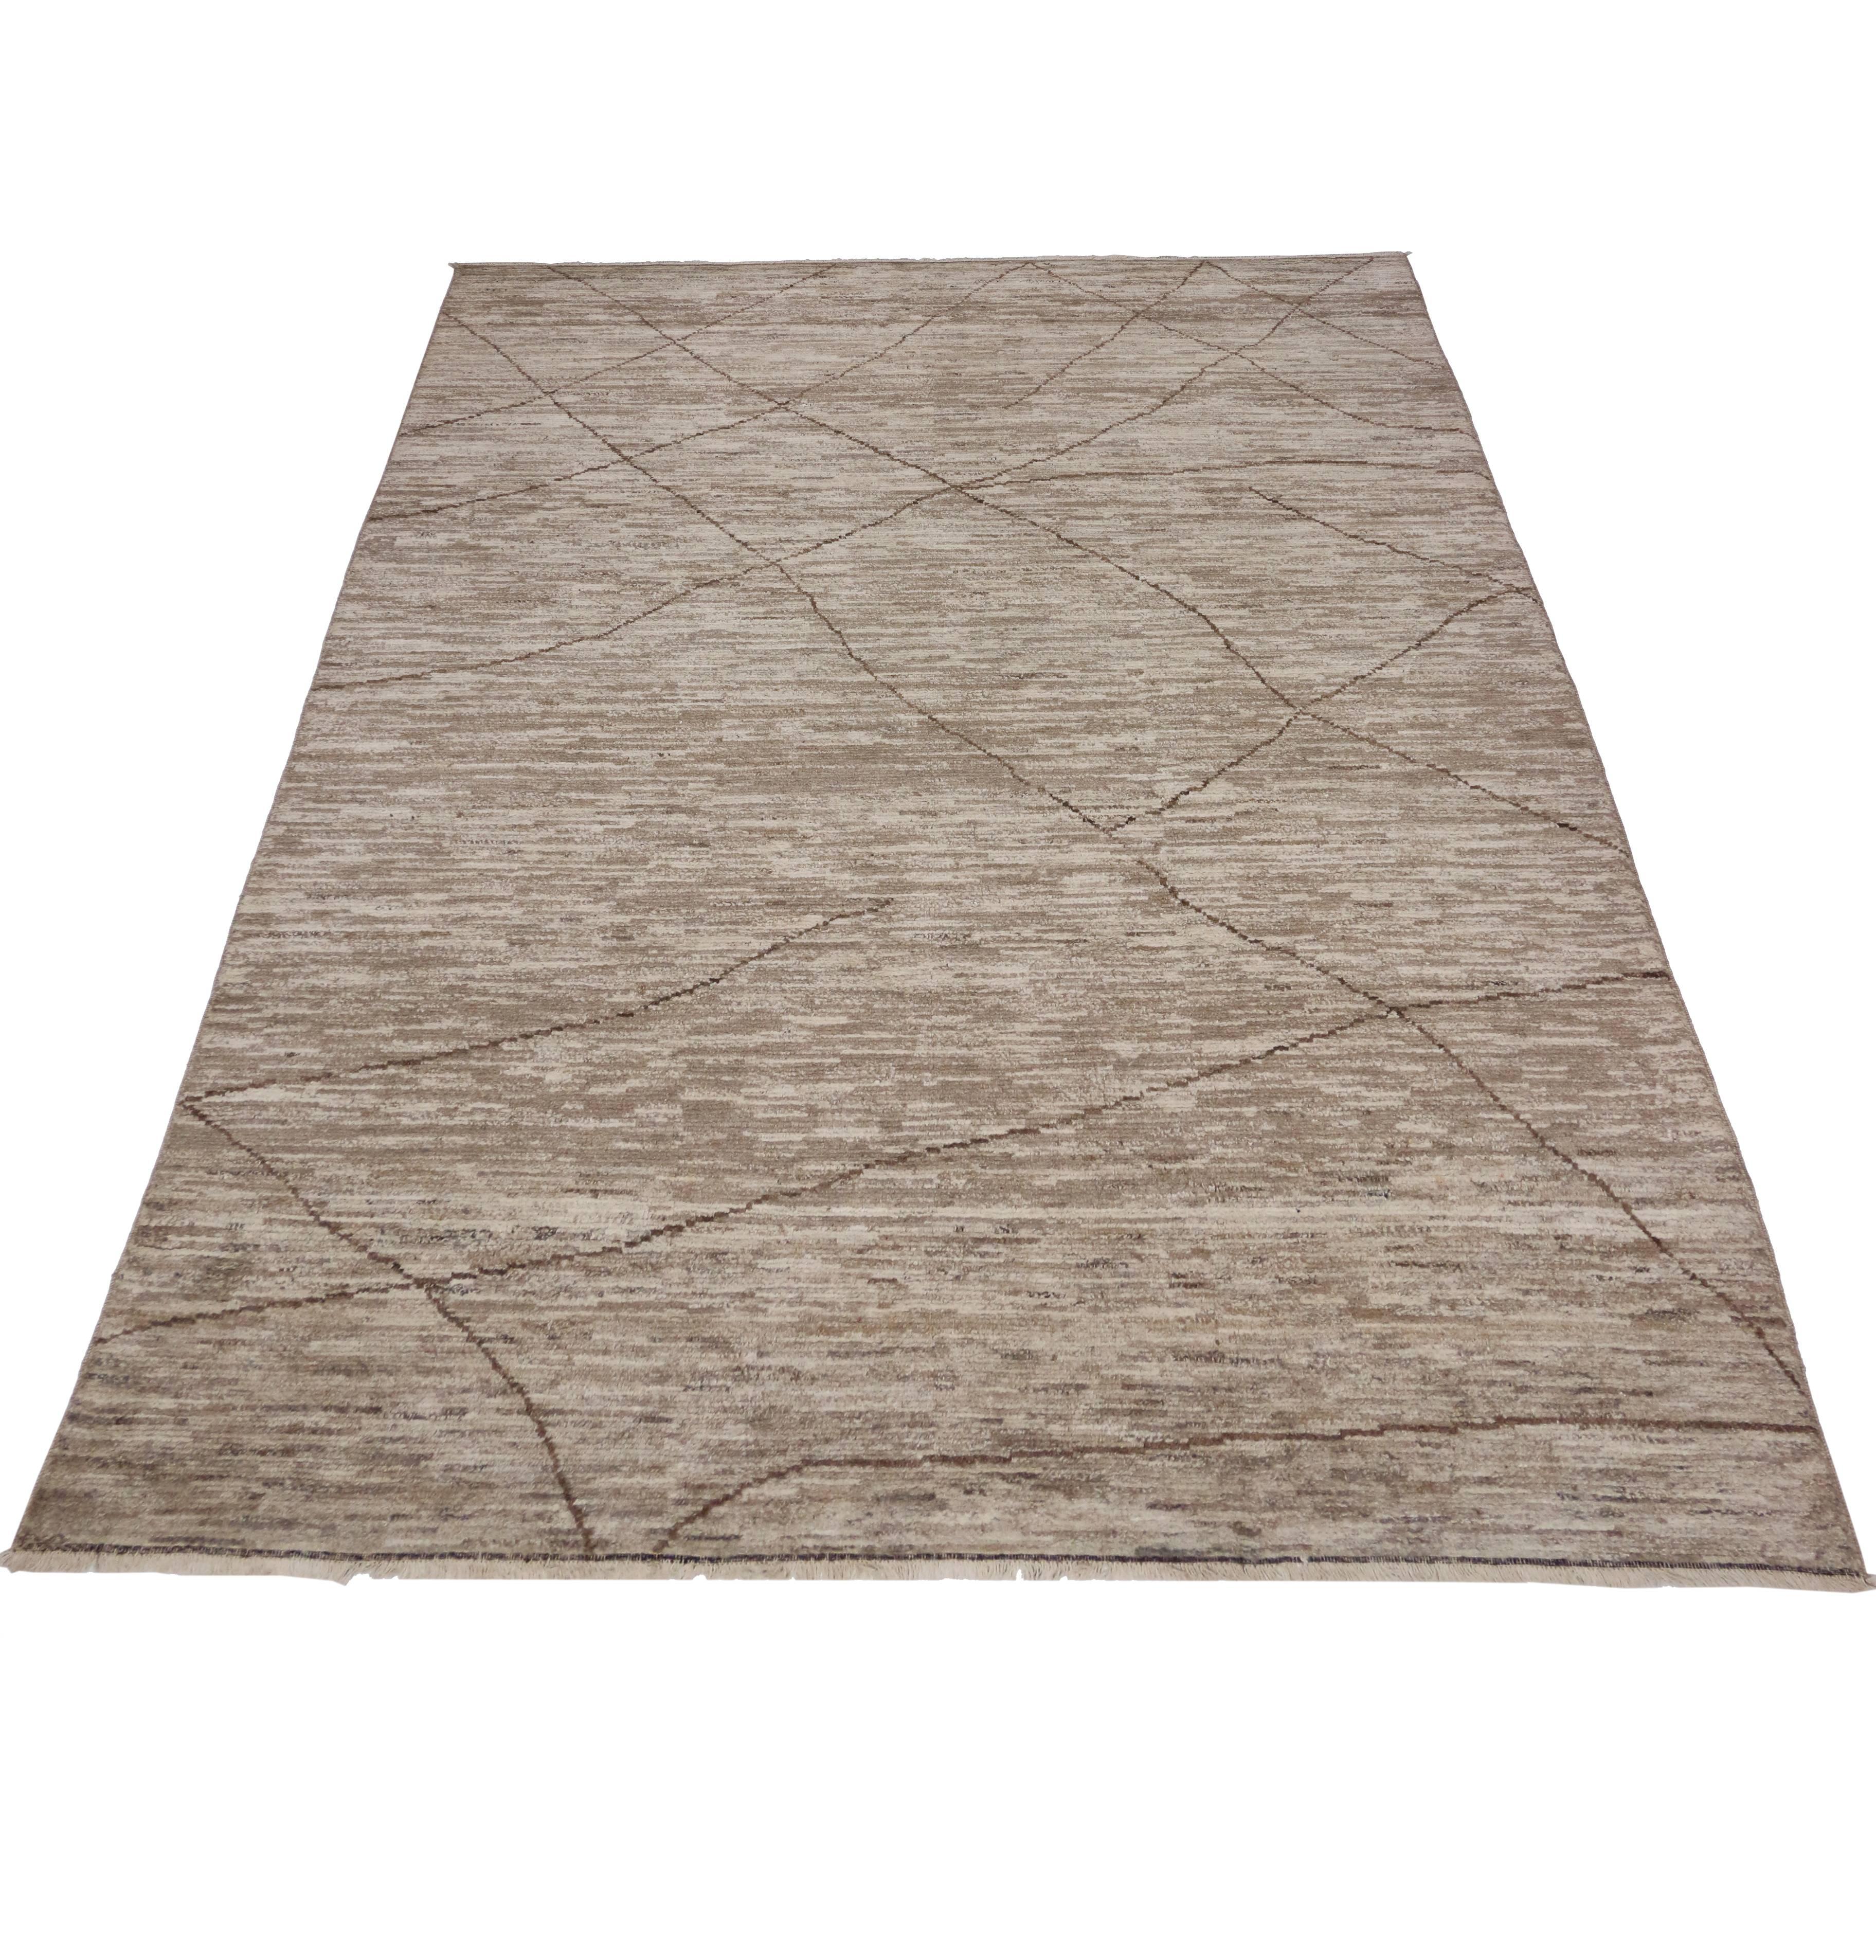 Tribal New Contemporary Moroccan Area Rug with Modern Design, Warm Neutral Earth Tones